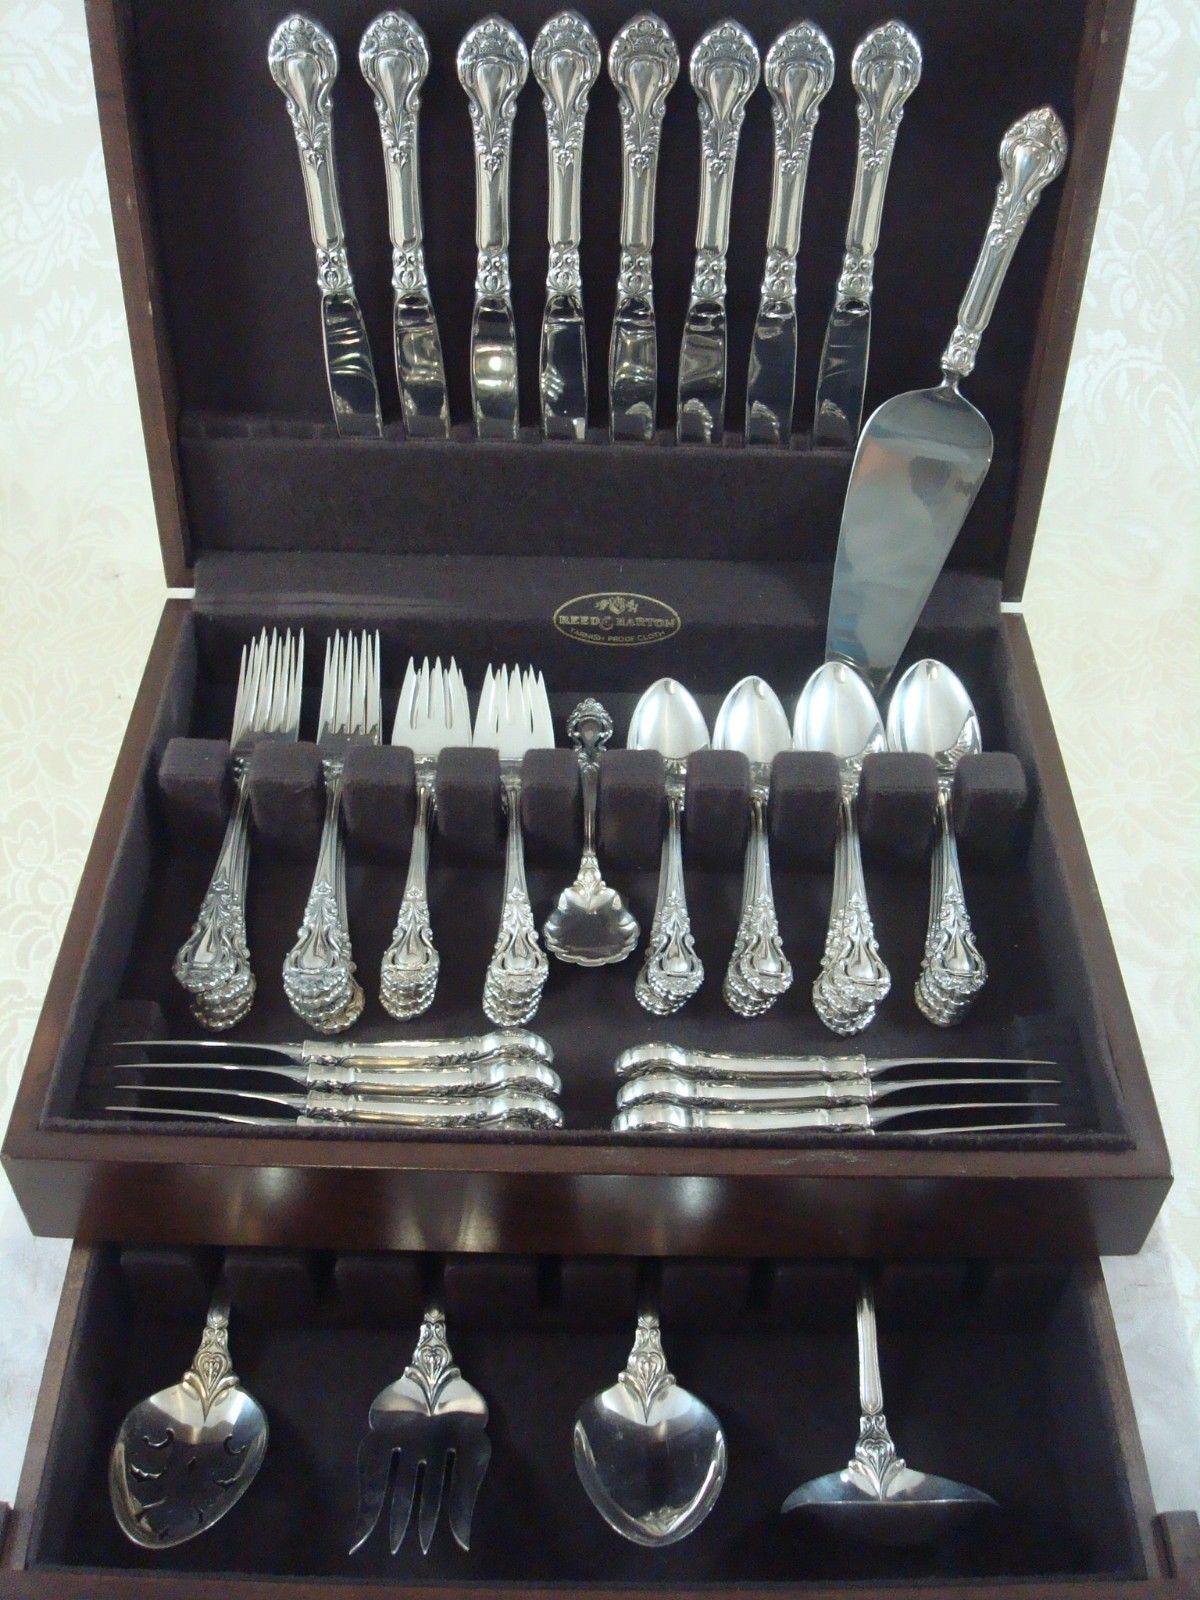 Superb Royal Dynasty by Kirk Stieff sterling silver flatware set of 54 piece set, in excellent condition. This ornate, beautiful pattern is well made and heavy. This set includes:

Eight knives, 9 1/4